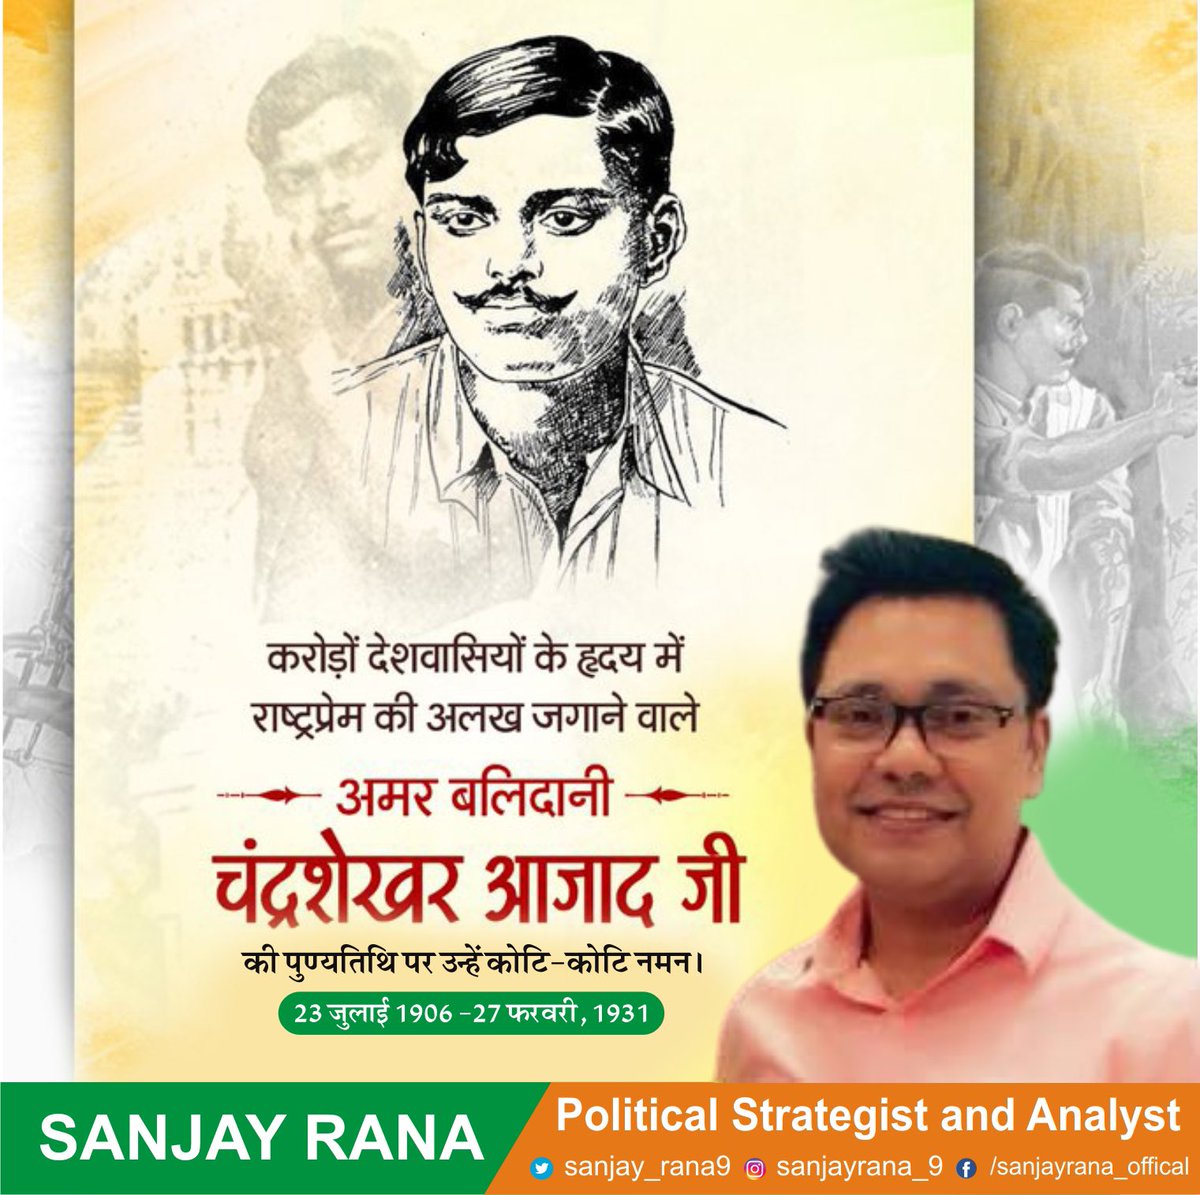 Today we remember the brave freedom fighter Chandra Shekhar Azad ji on his punyatithi. 
He was a proud son of Maa Bharti who fought fiercely against the oppressive British Empire to free his motherland!

#chandrashekarazad